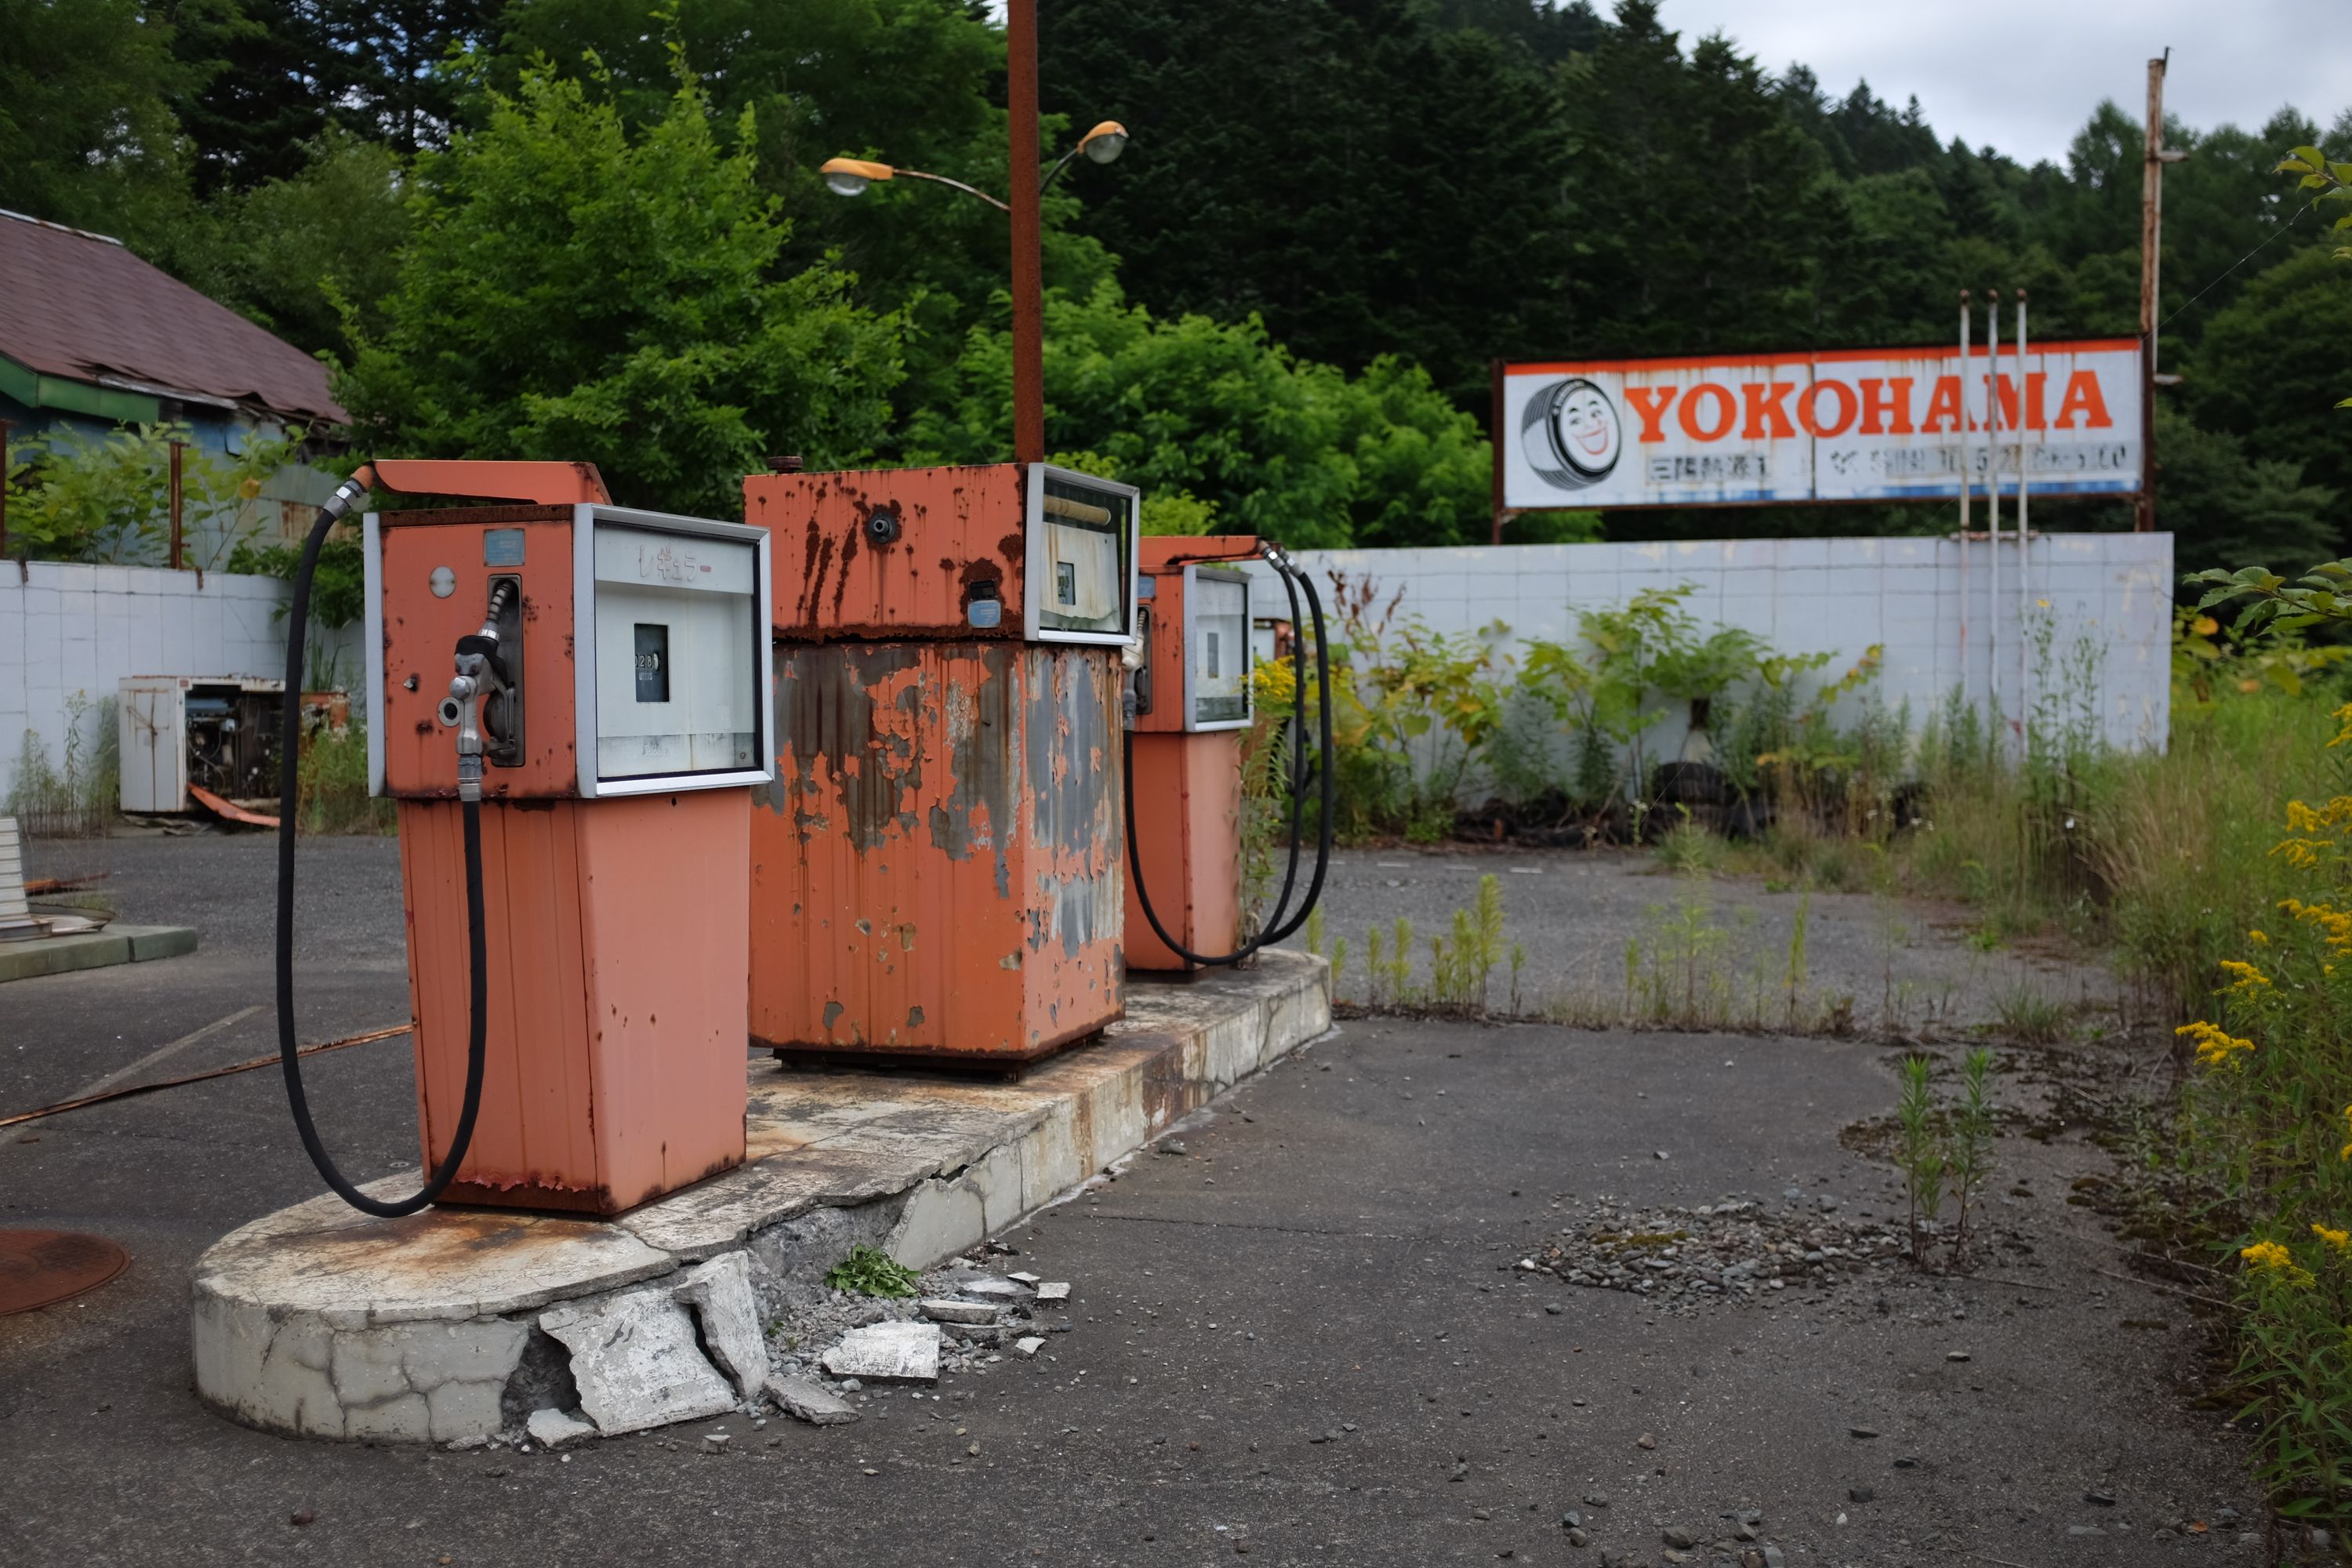 Rusting pumps at an abandoned filling station.